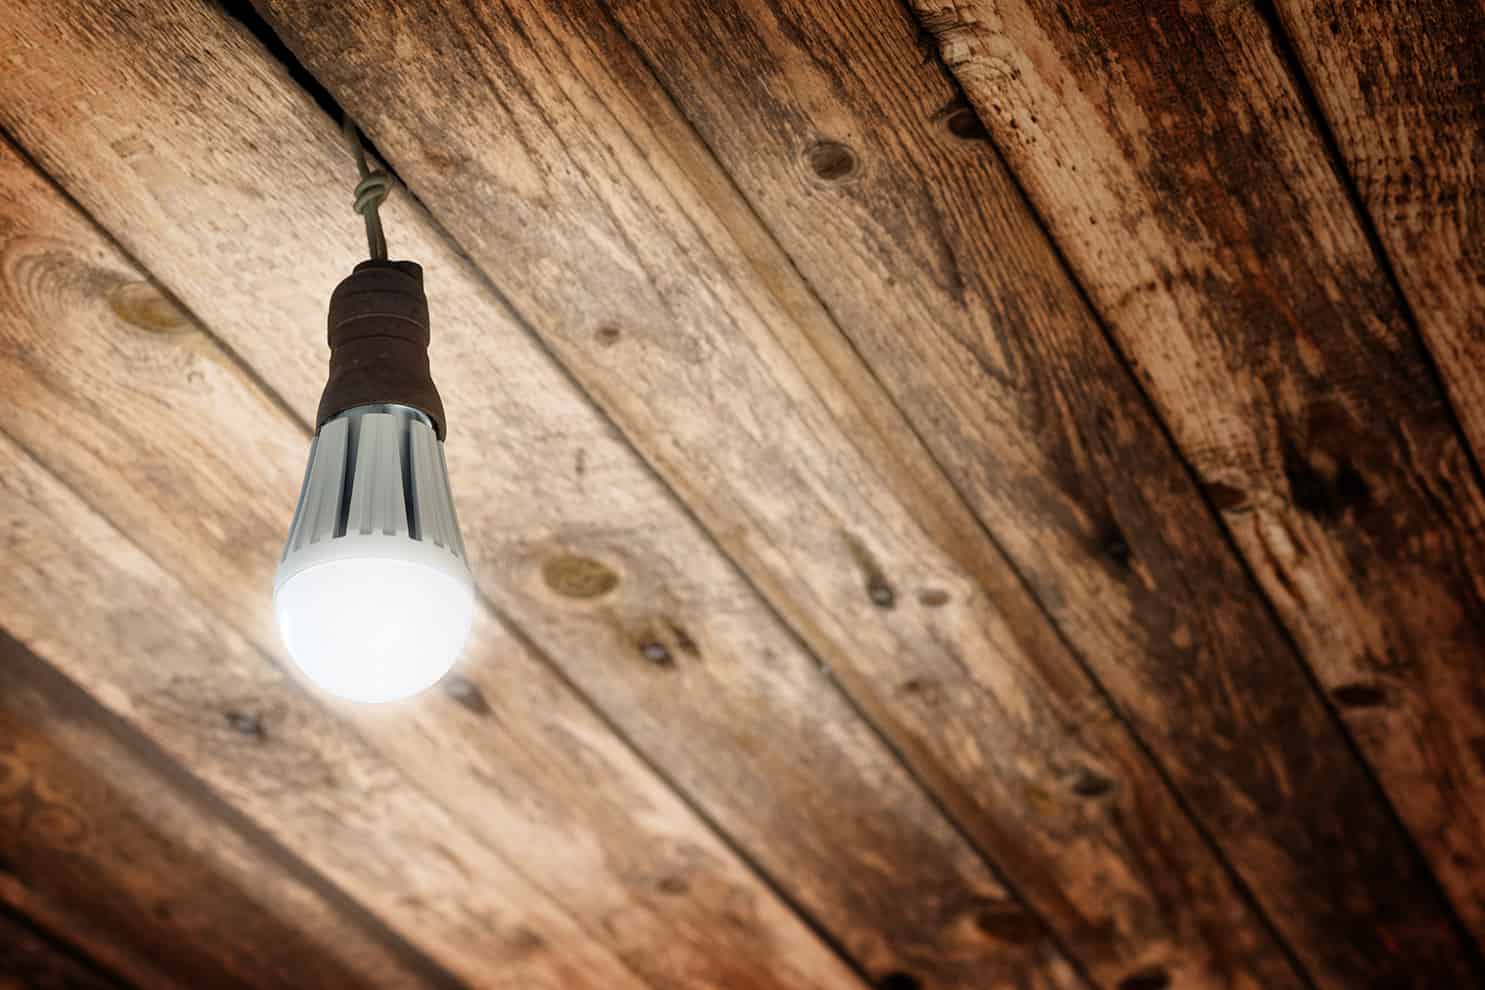 New LED light bulb replacing old bulb in an eco-friendly workplace